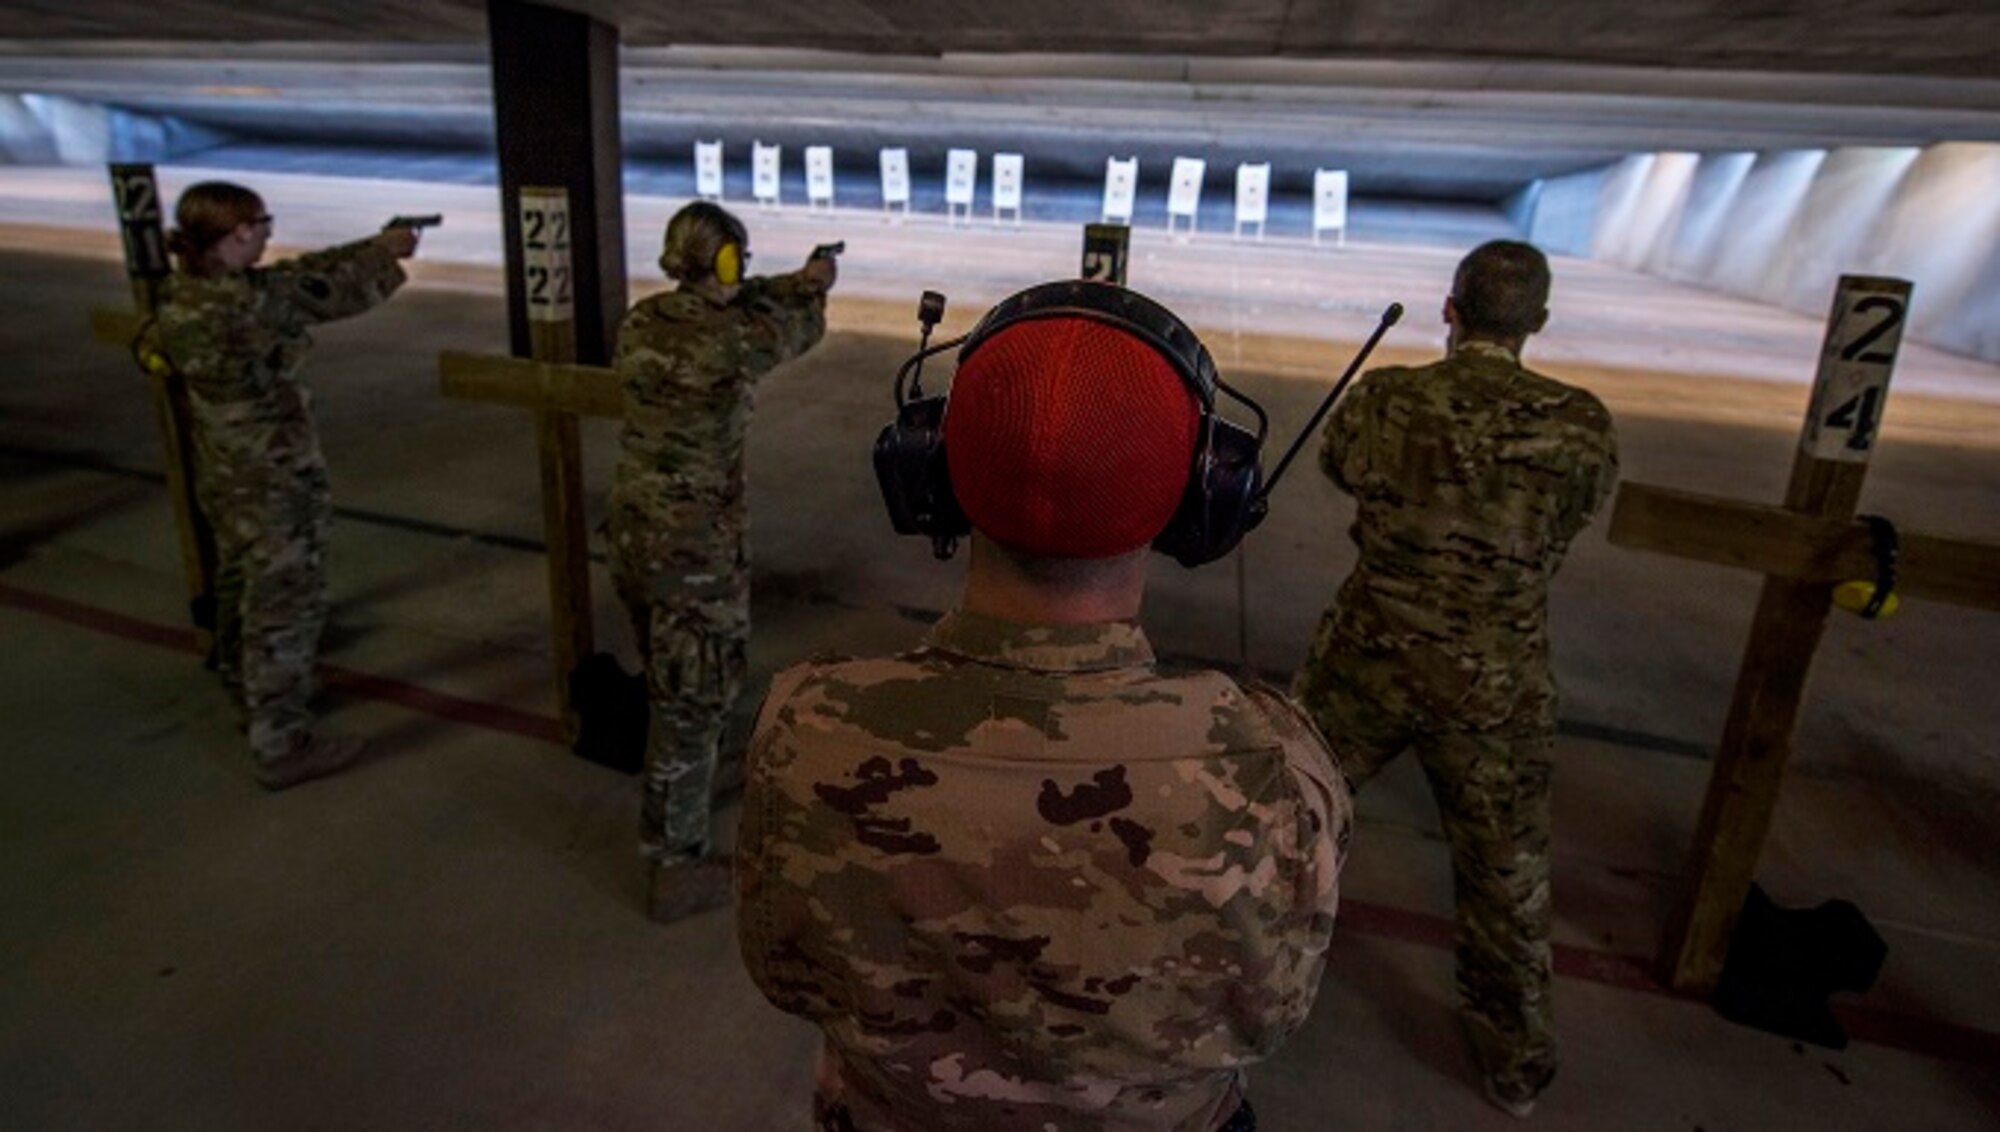 Airmen at a gun range shoot at targets with pistols as an instructor watches them form behind